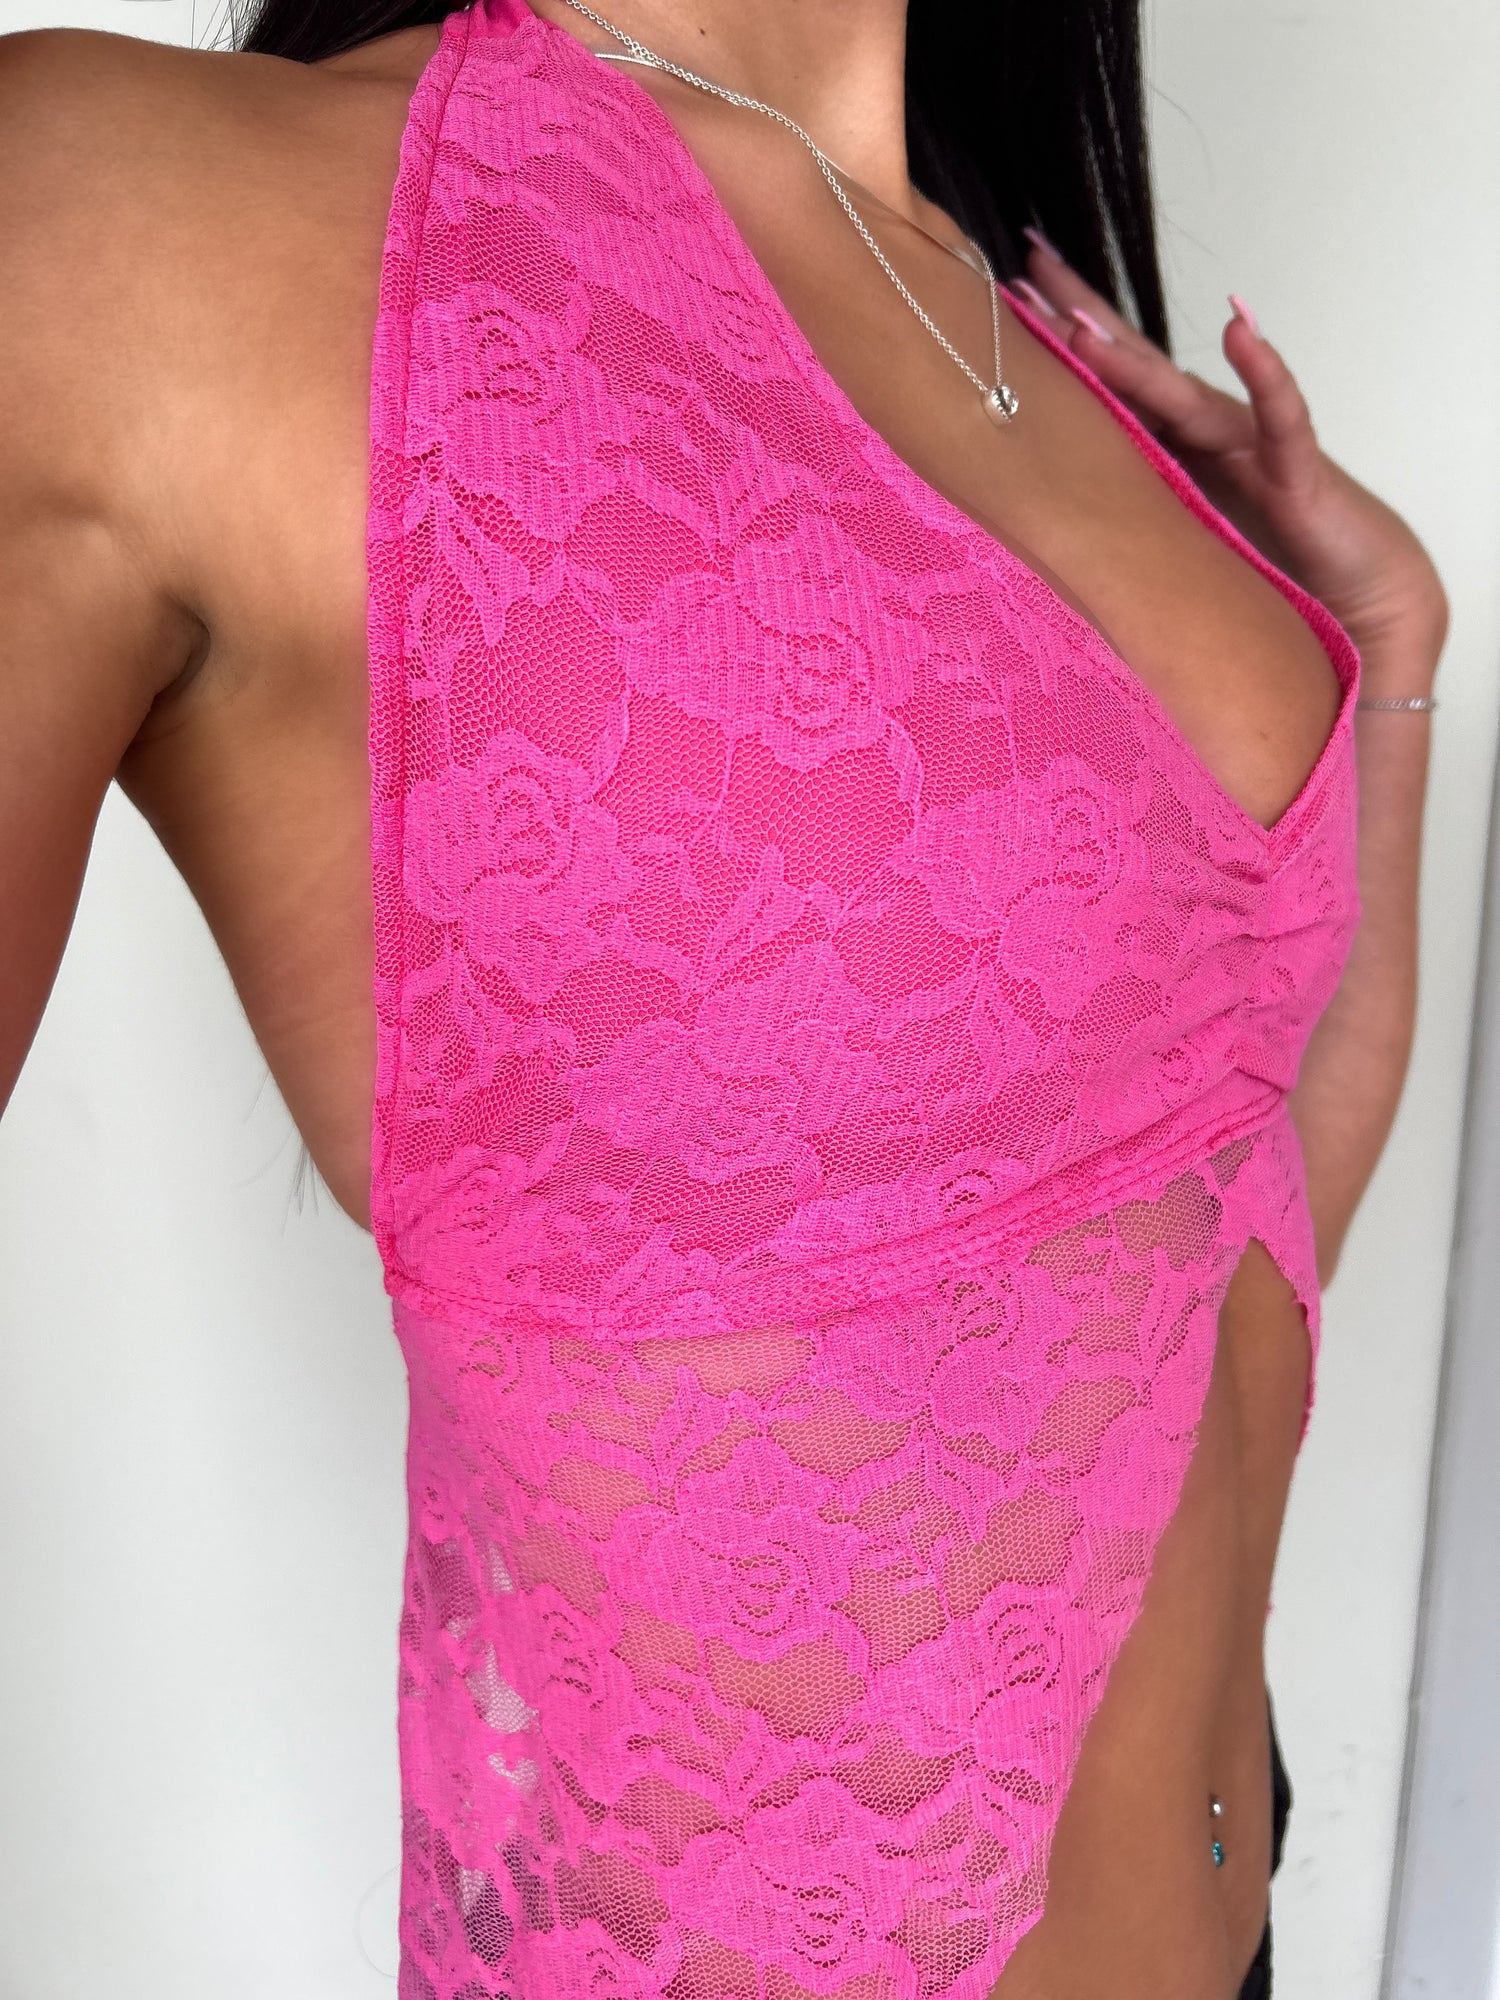 Hot pink lace top